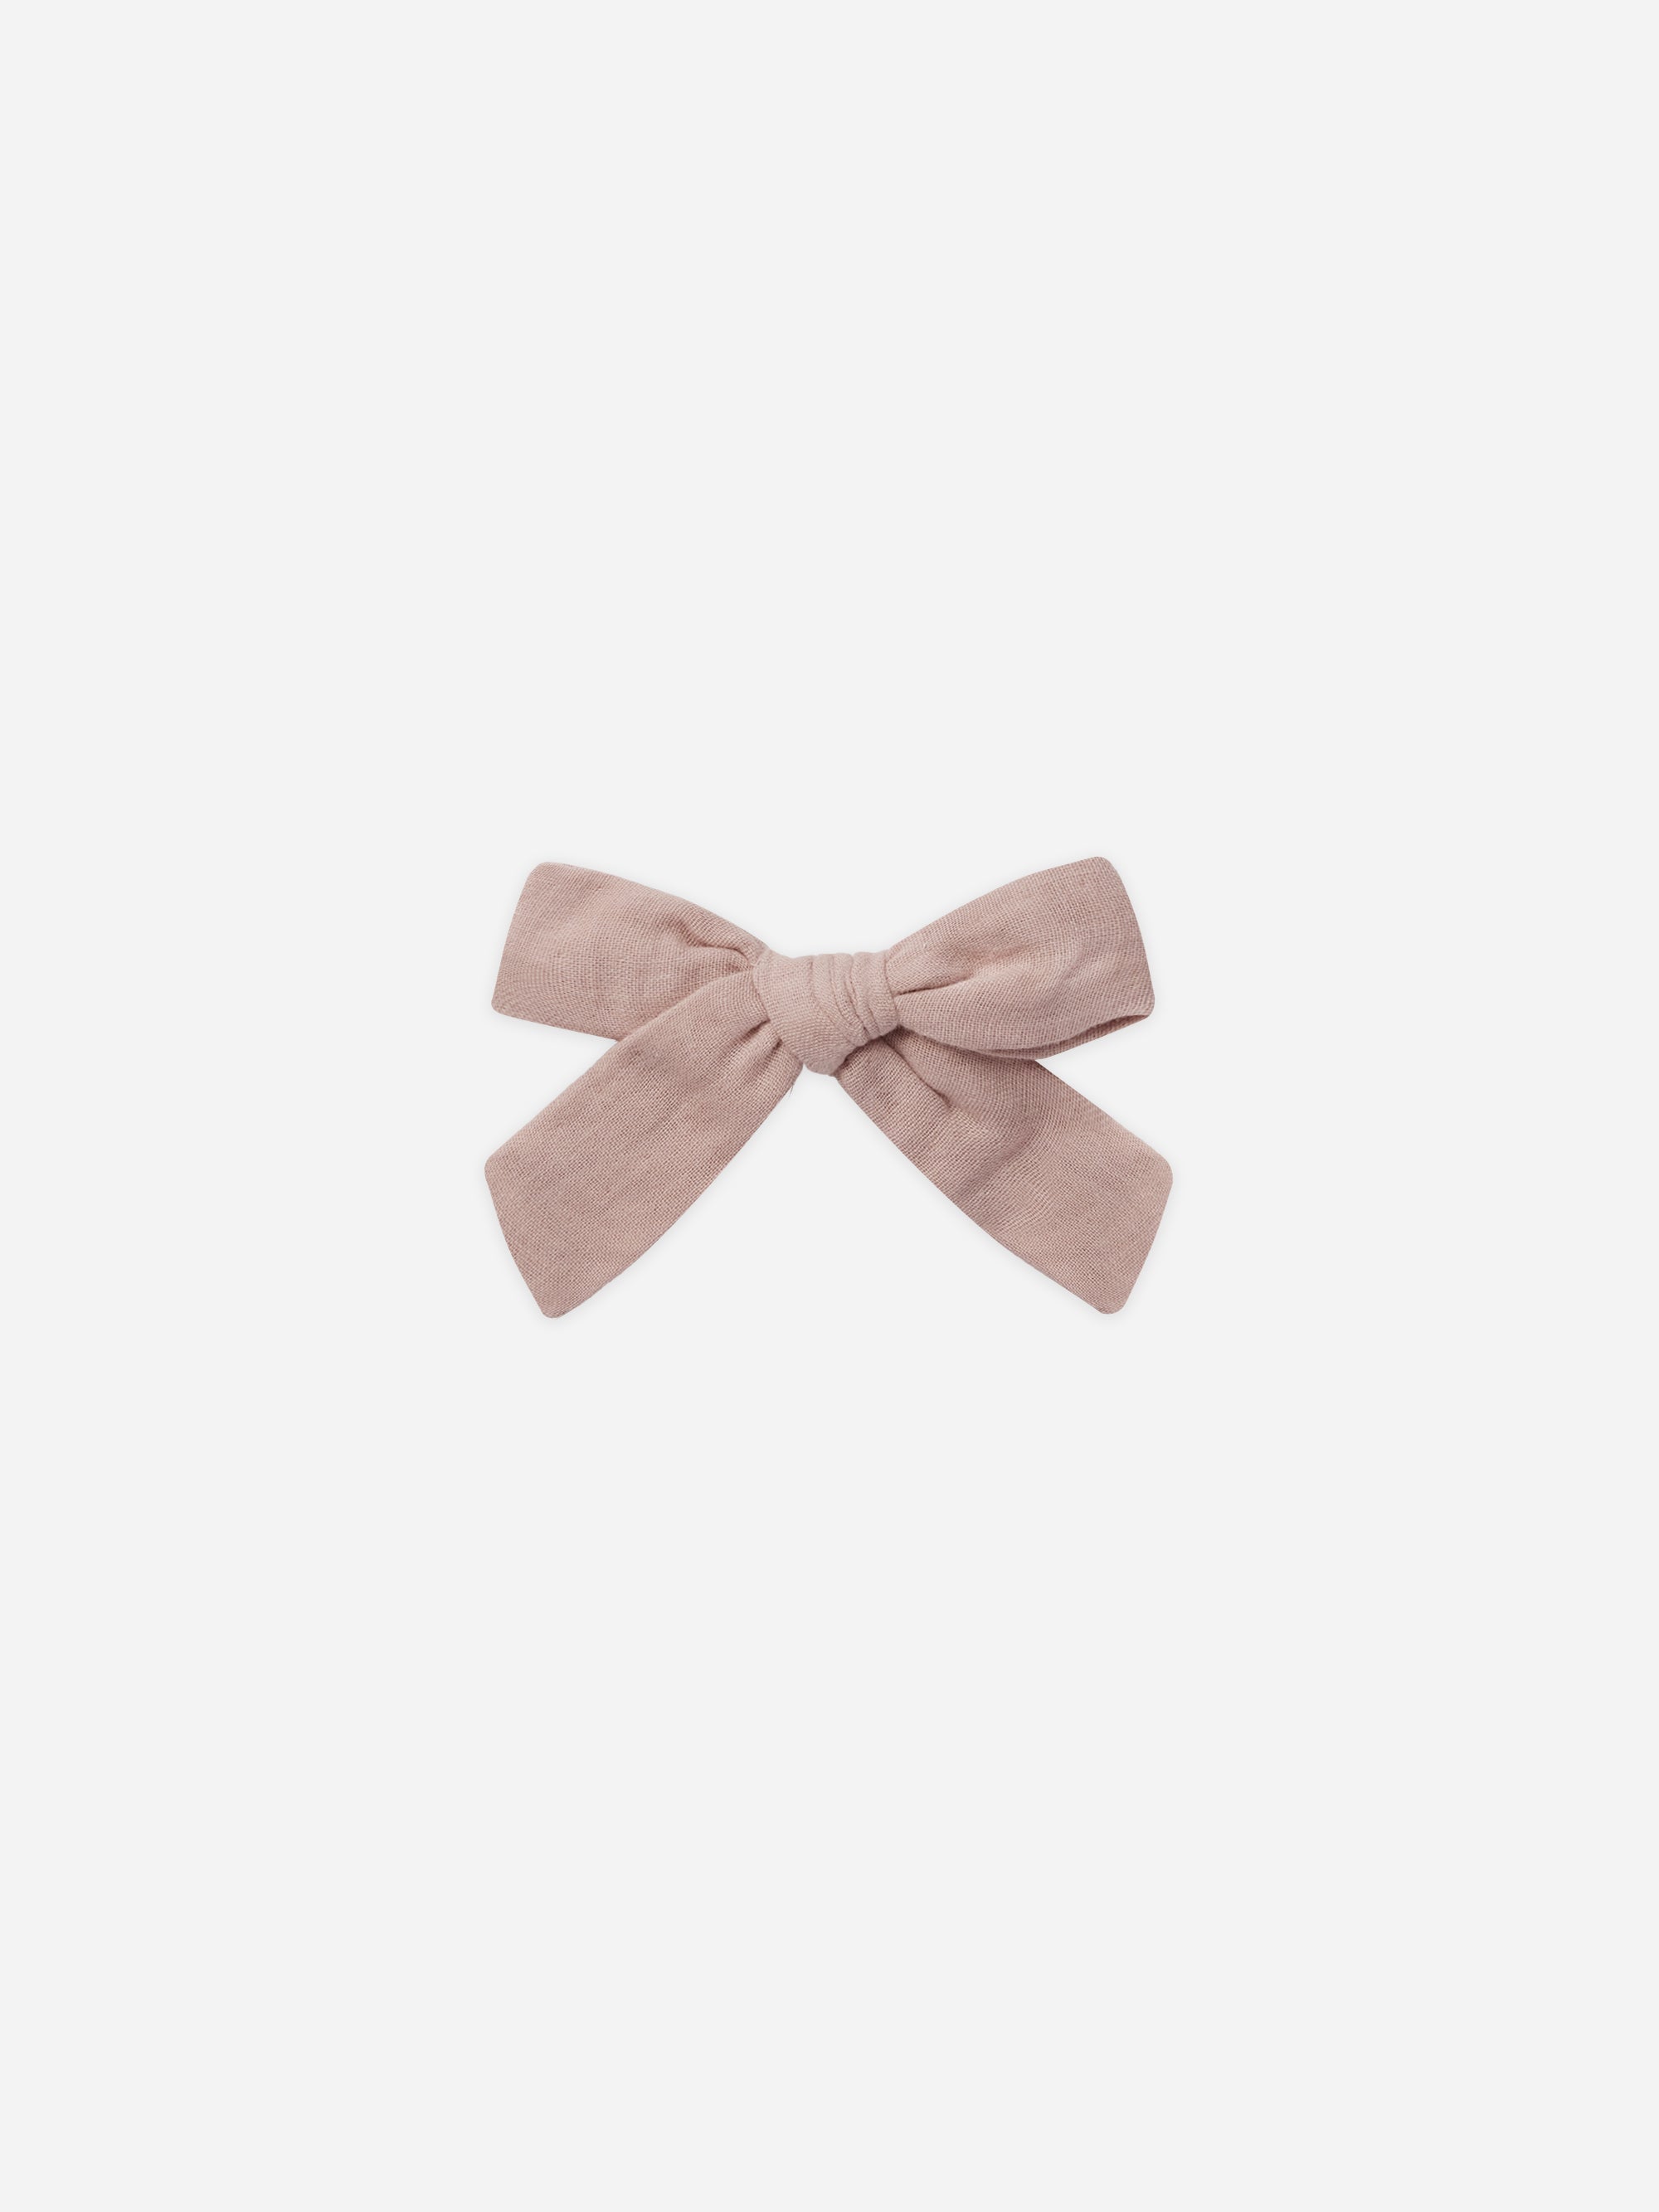 Girl Bow || Mauve - Rylee + Cru | Kids Clothes | Trendy Baby Clothes | Modern Infant Outfits |